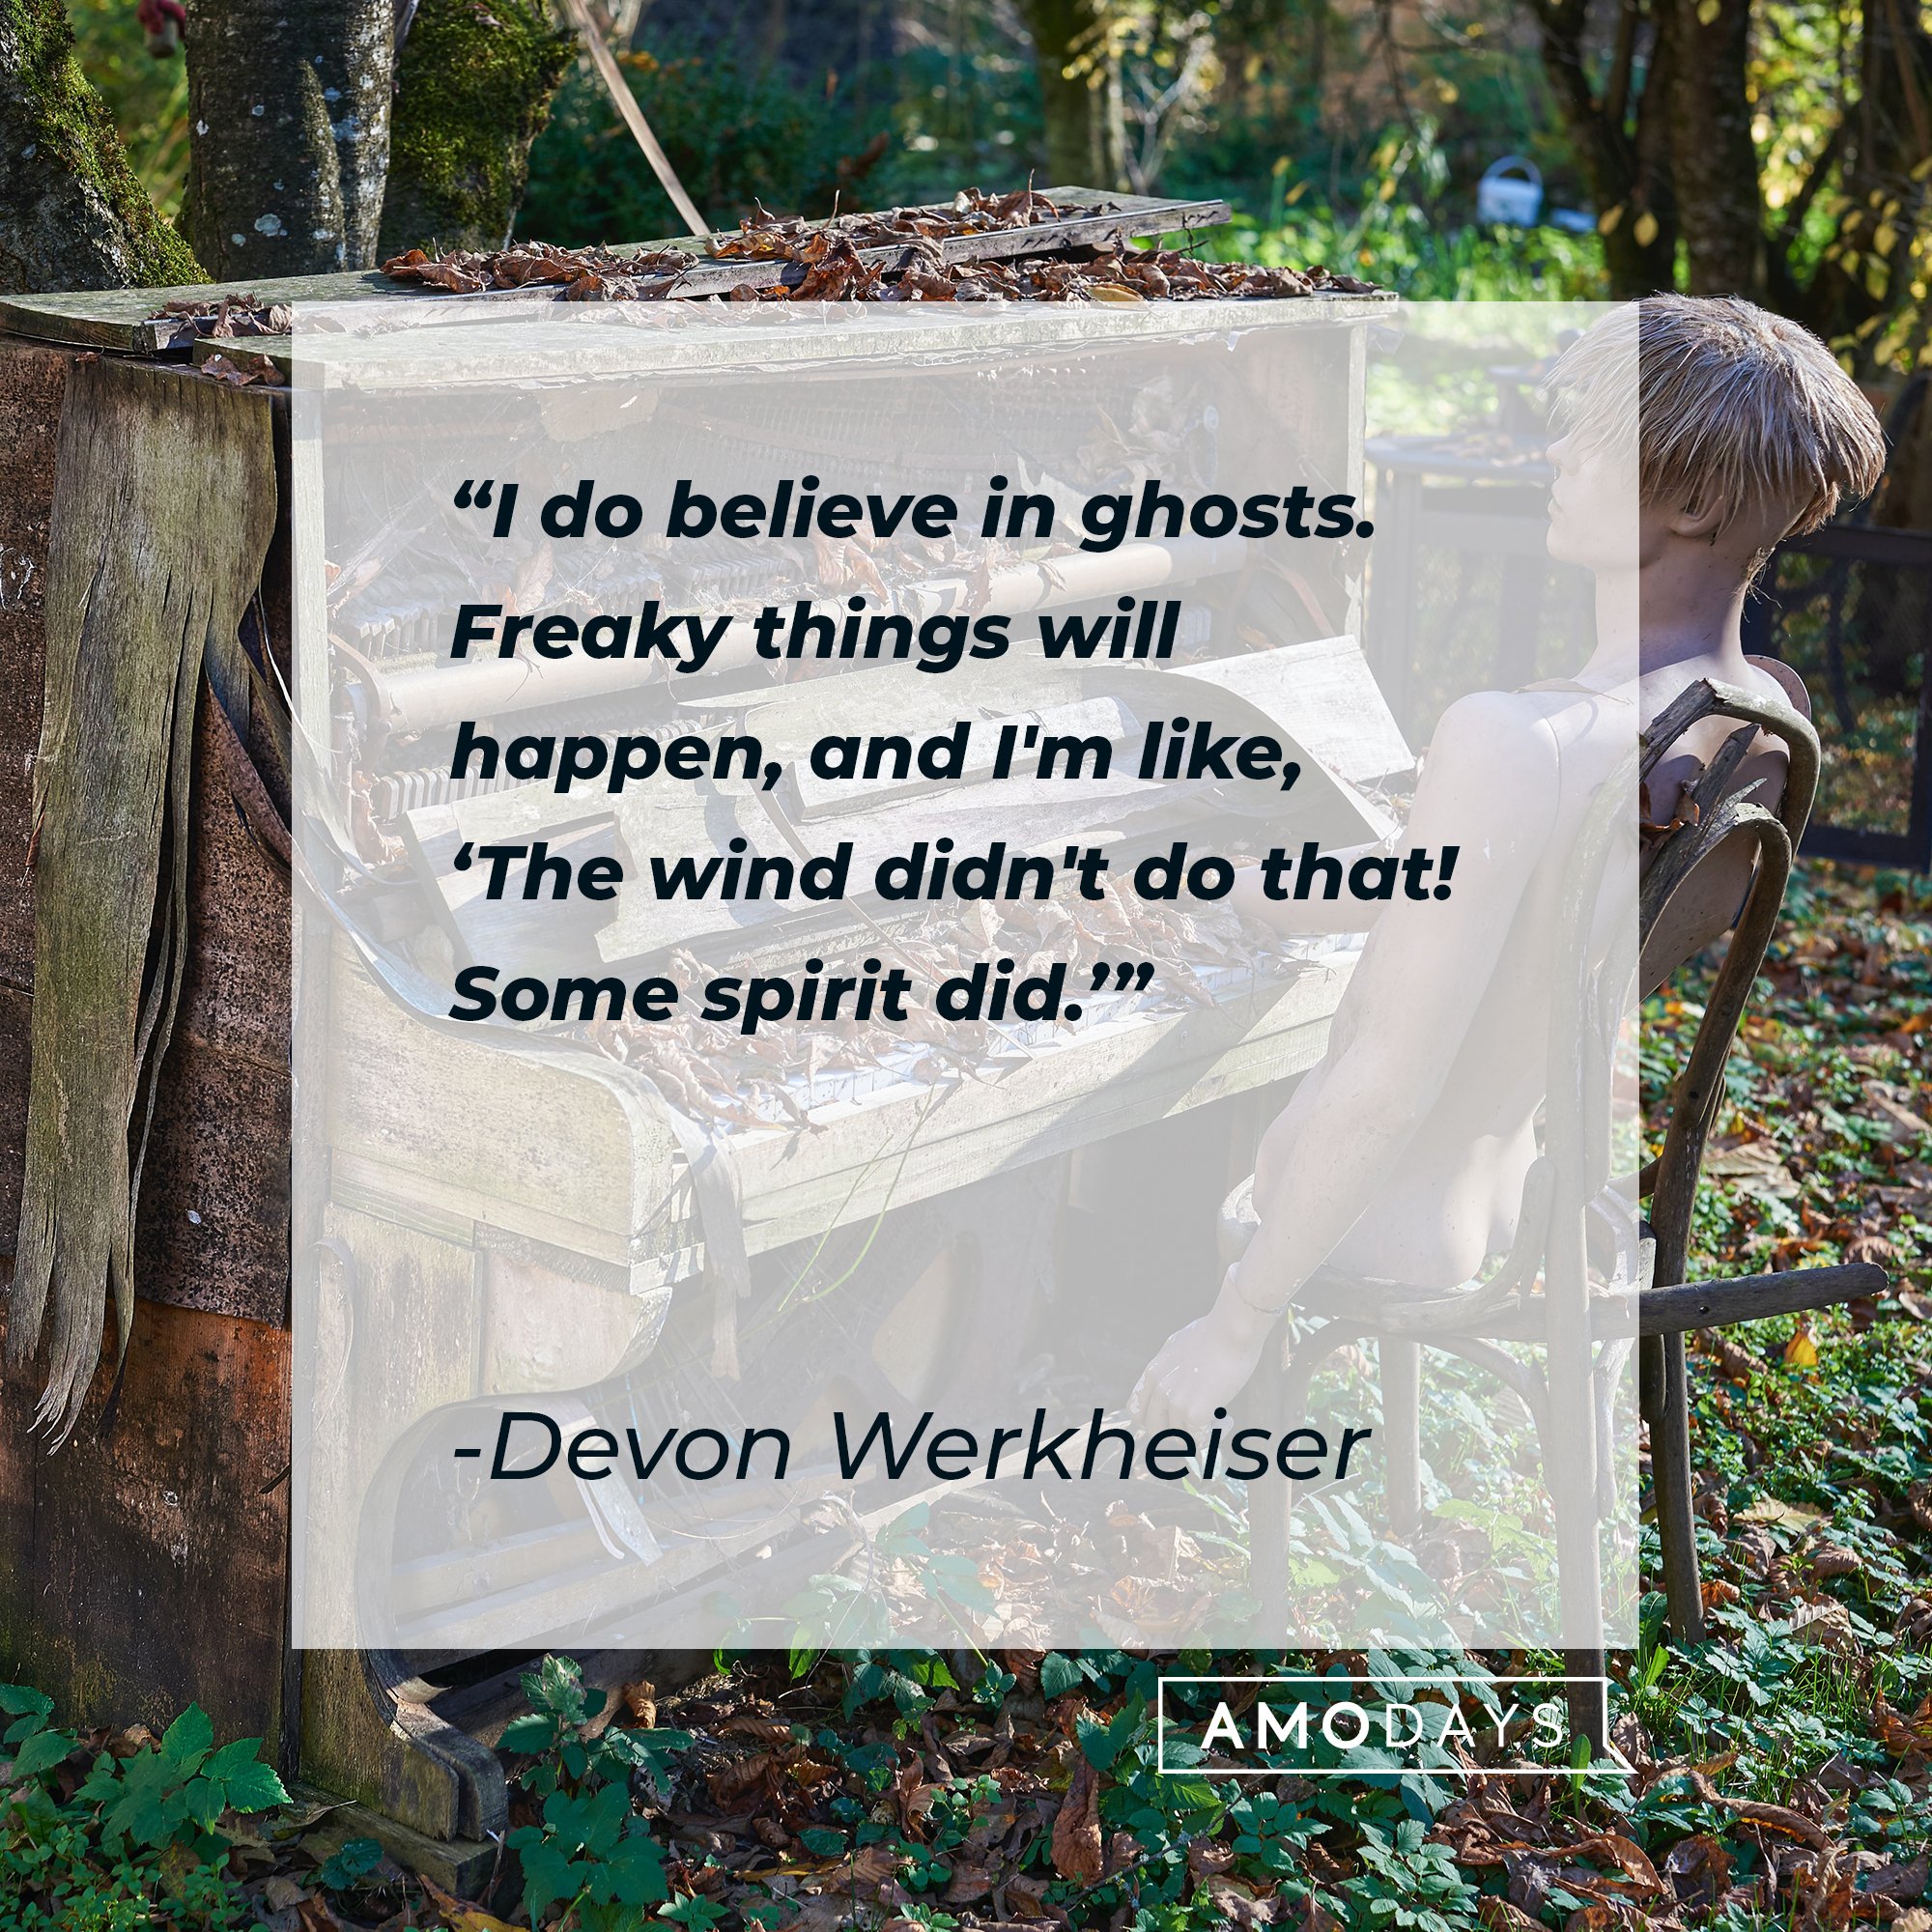 Devon Werkheiser’s quote: "I do believe in ghosts. Freaky things will happen, and I'm like, 'The wind didn't do that! Some spirit did.'" | Image: AmoDays